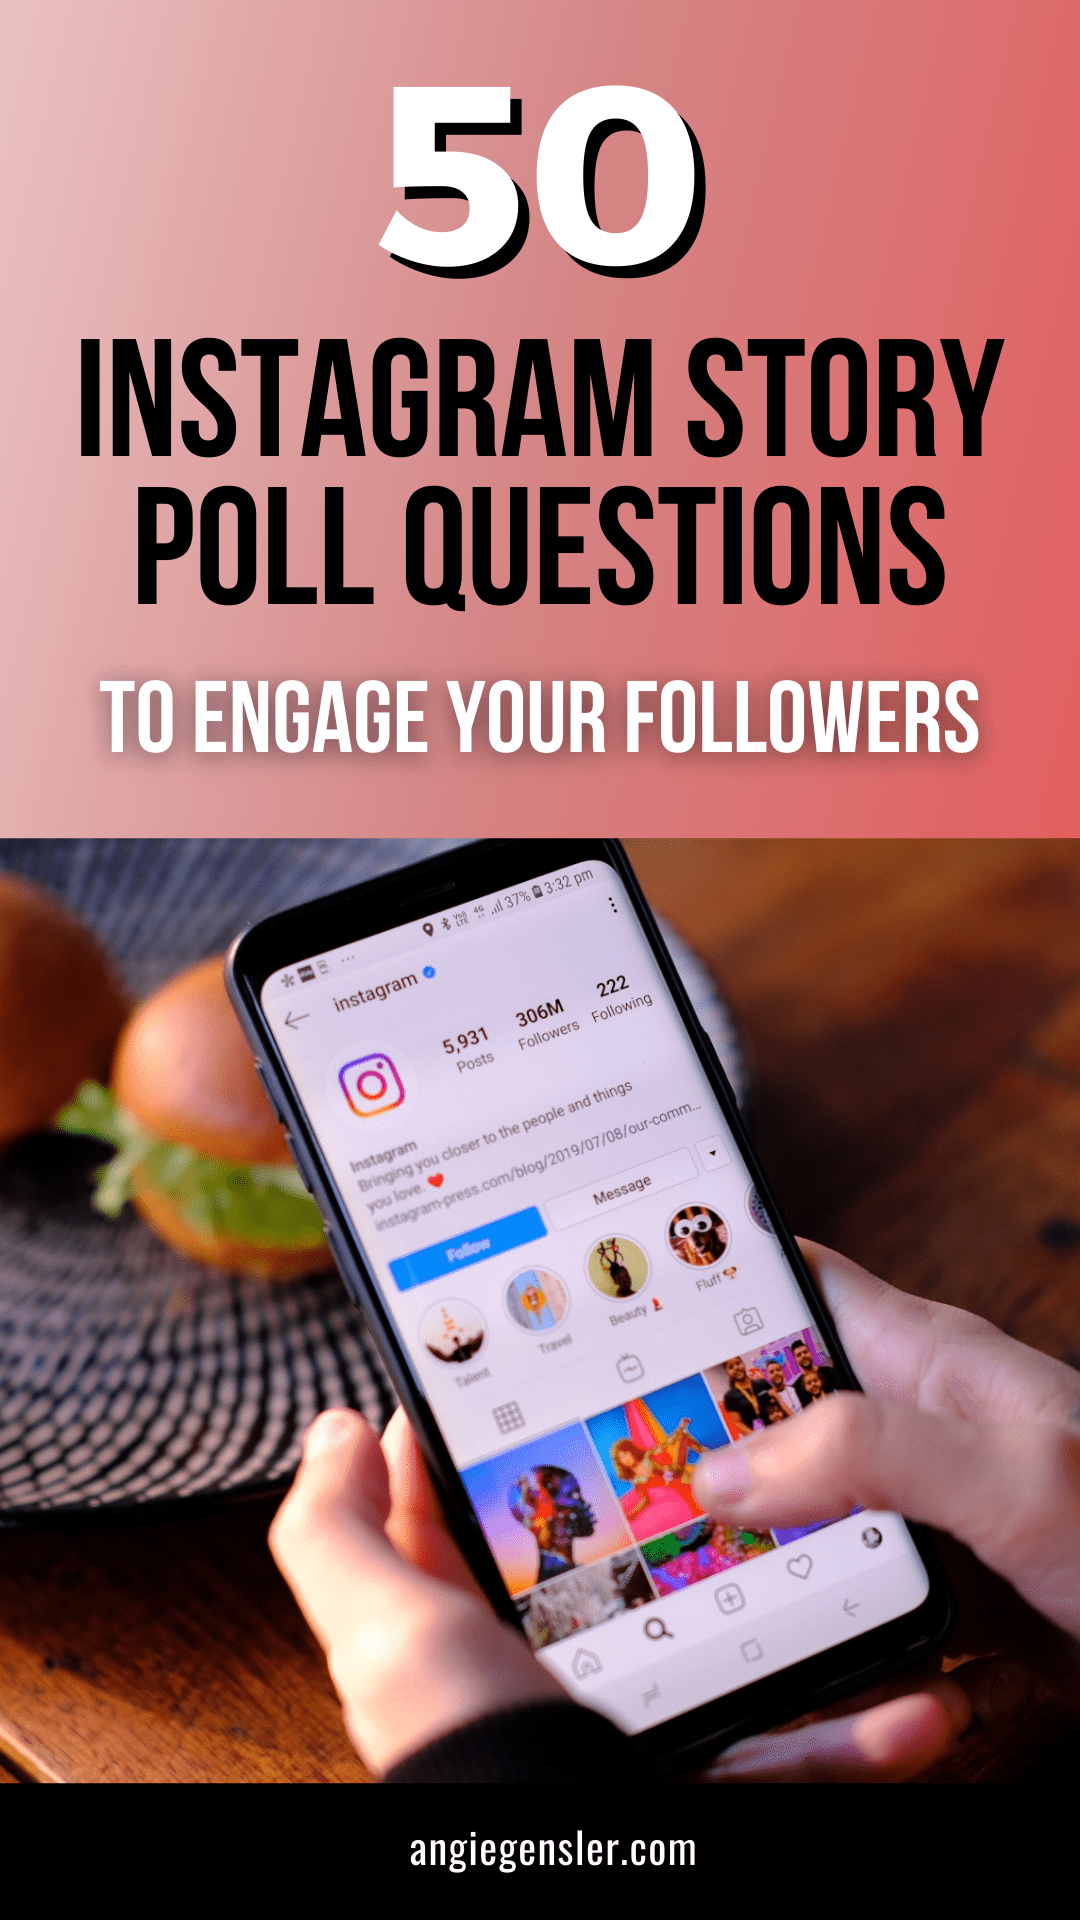 50 Engaging Instagram Story Poll Questions to Ask Your Followers ...